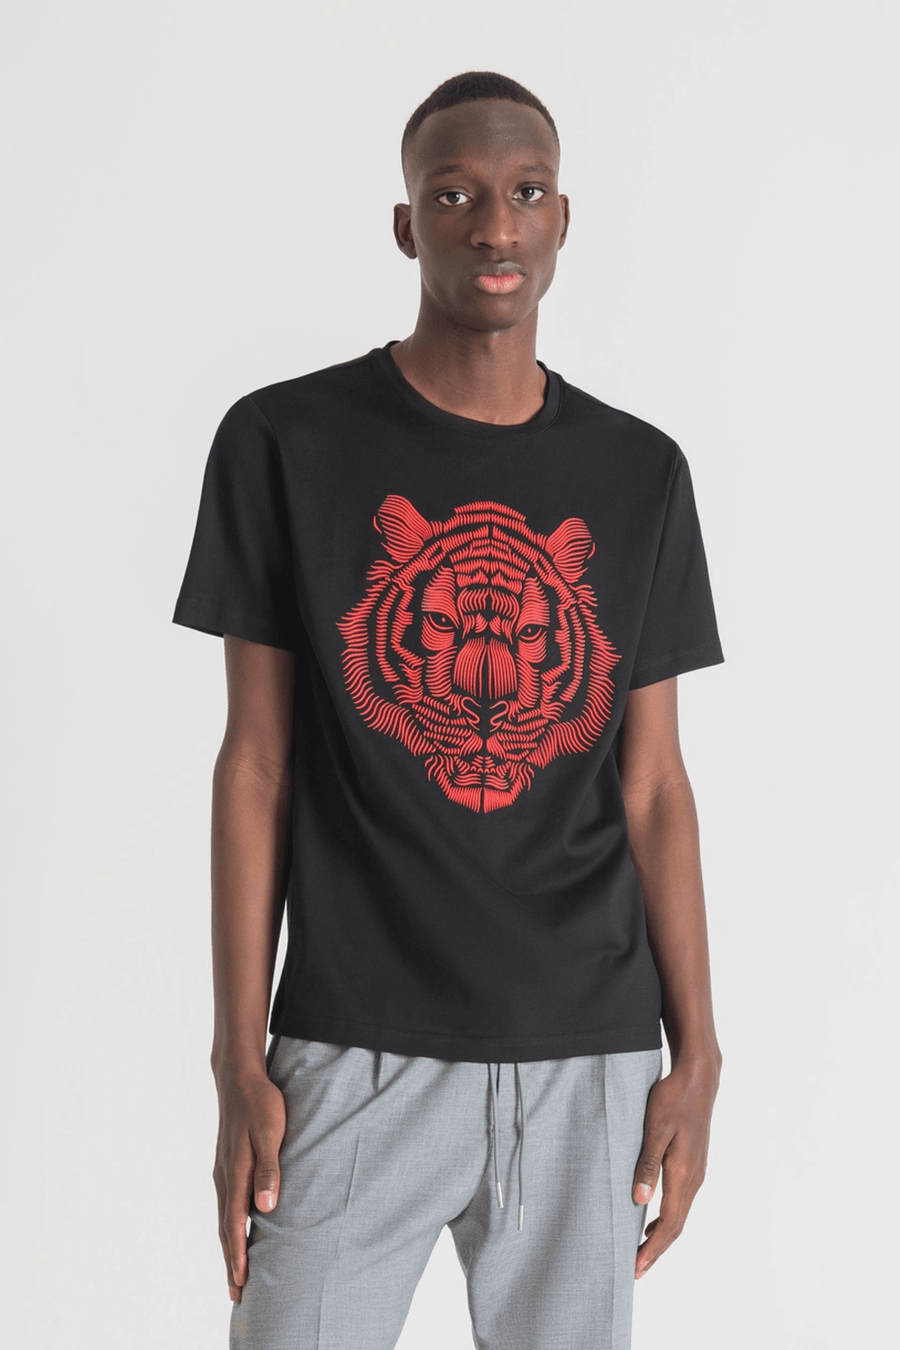 Buy the Antony Morato Slim Fit Tiger Print T-Shirt in Black/Red at Intro. Spend £50 for free UK delivery. Official stockists. We ship worldwide.